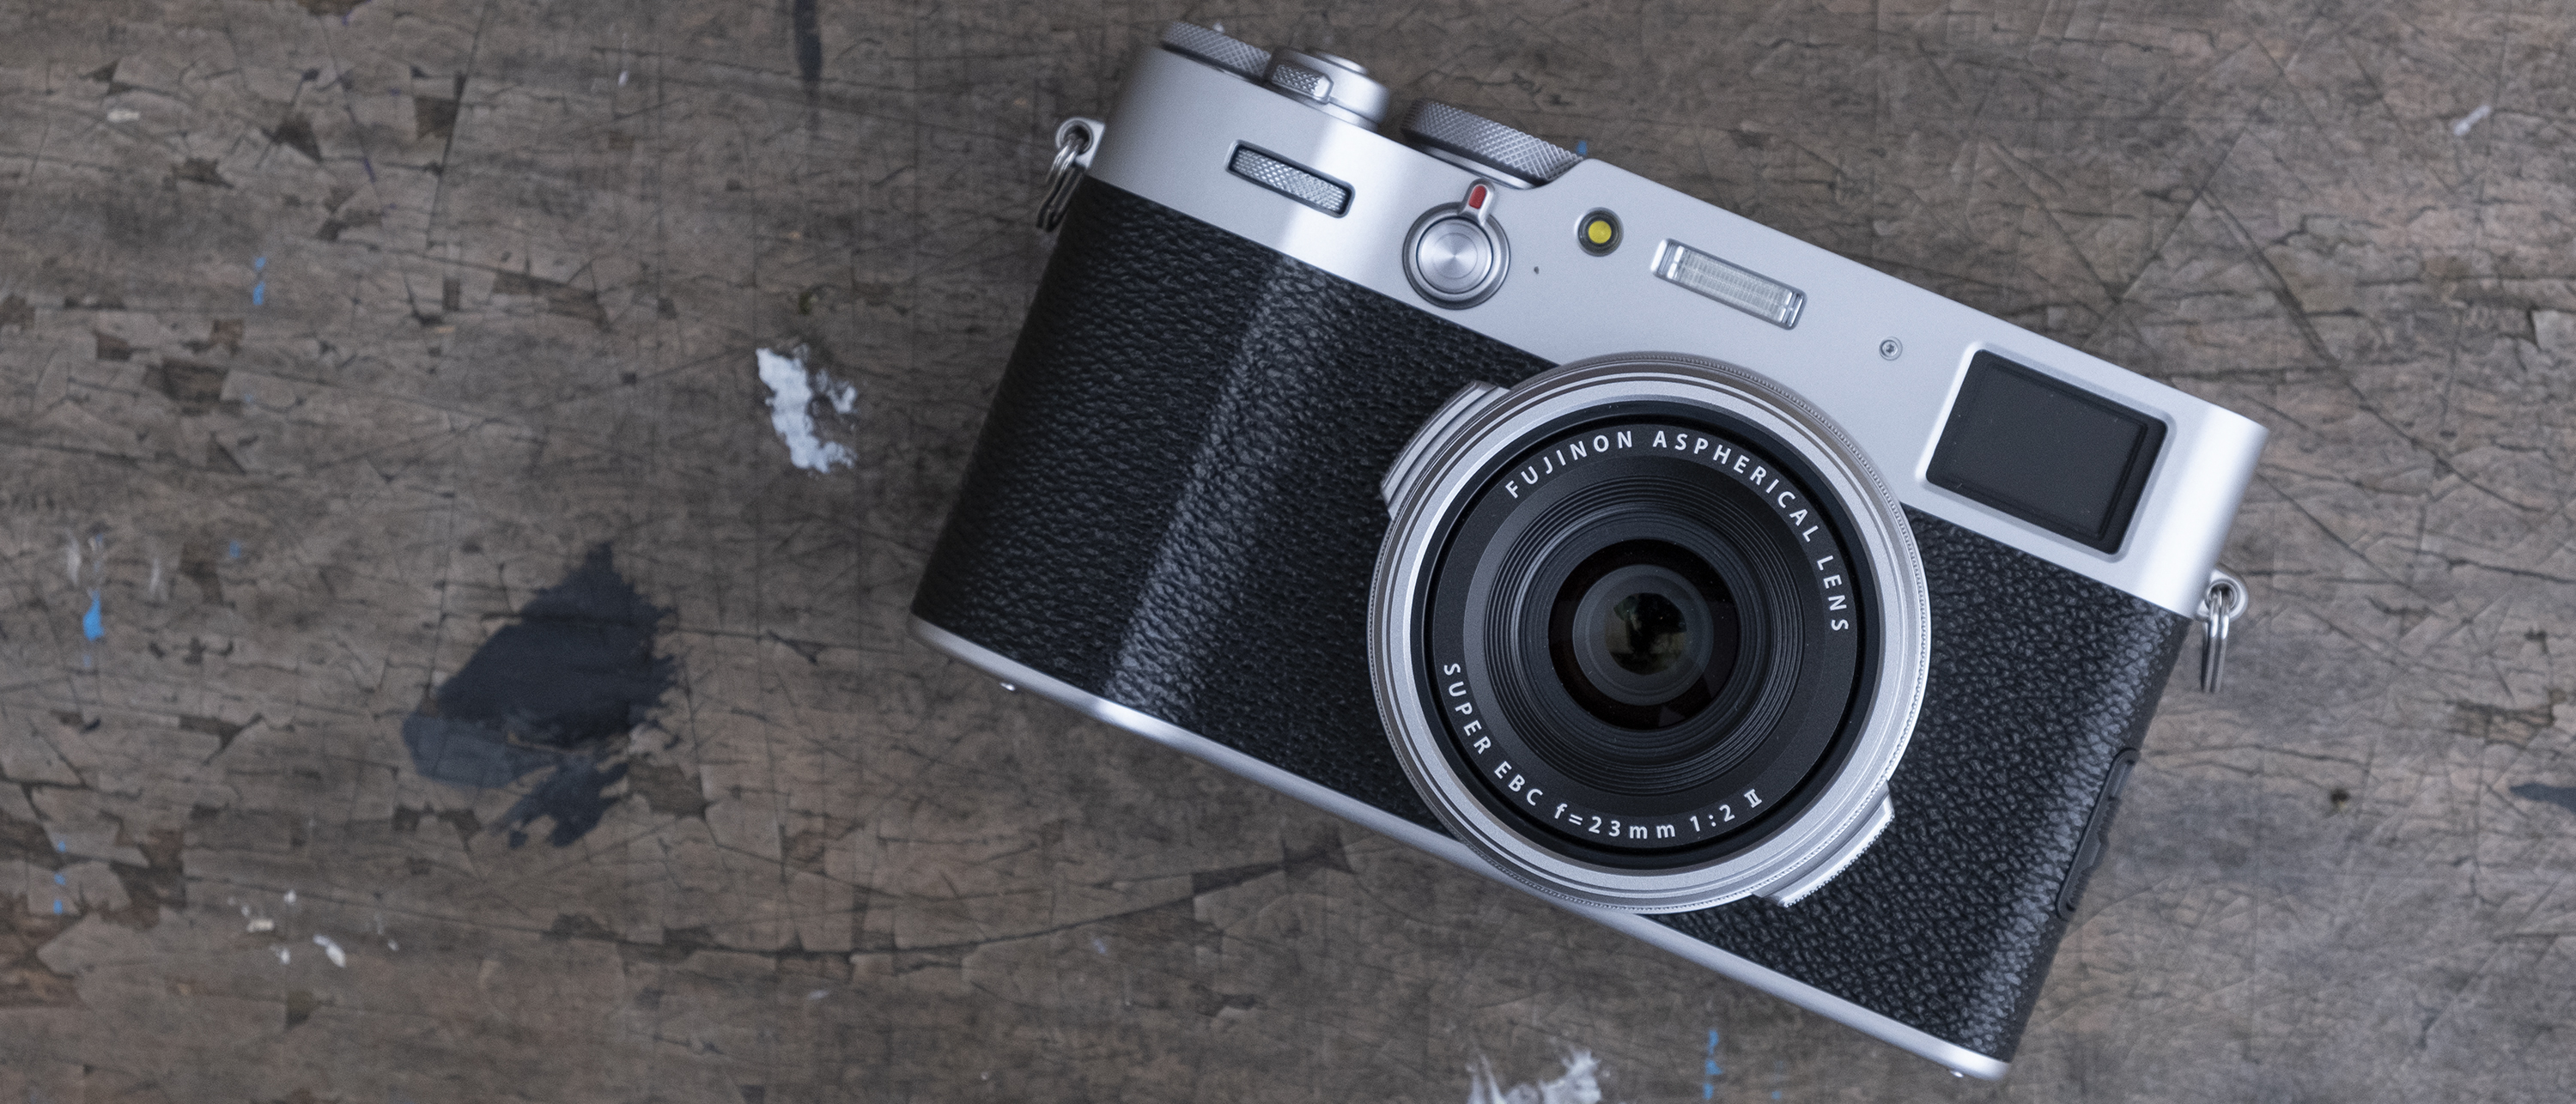 Fujifilm's X100V adds a new lens and tilting screen to a classic